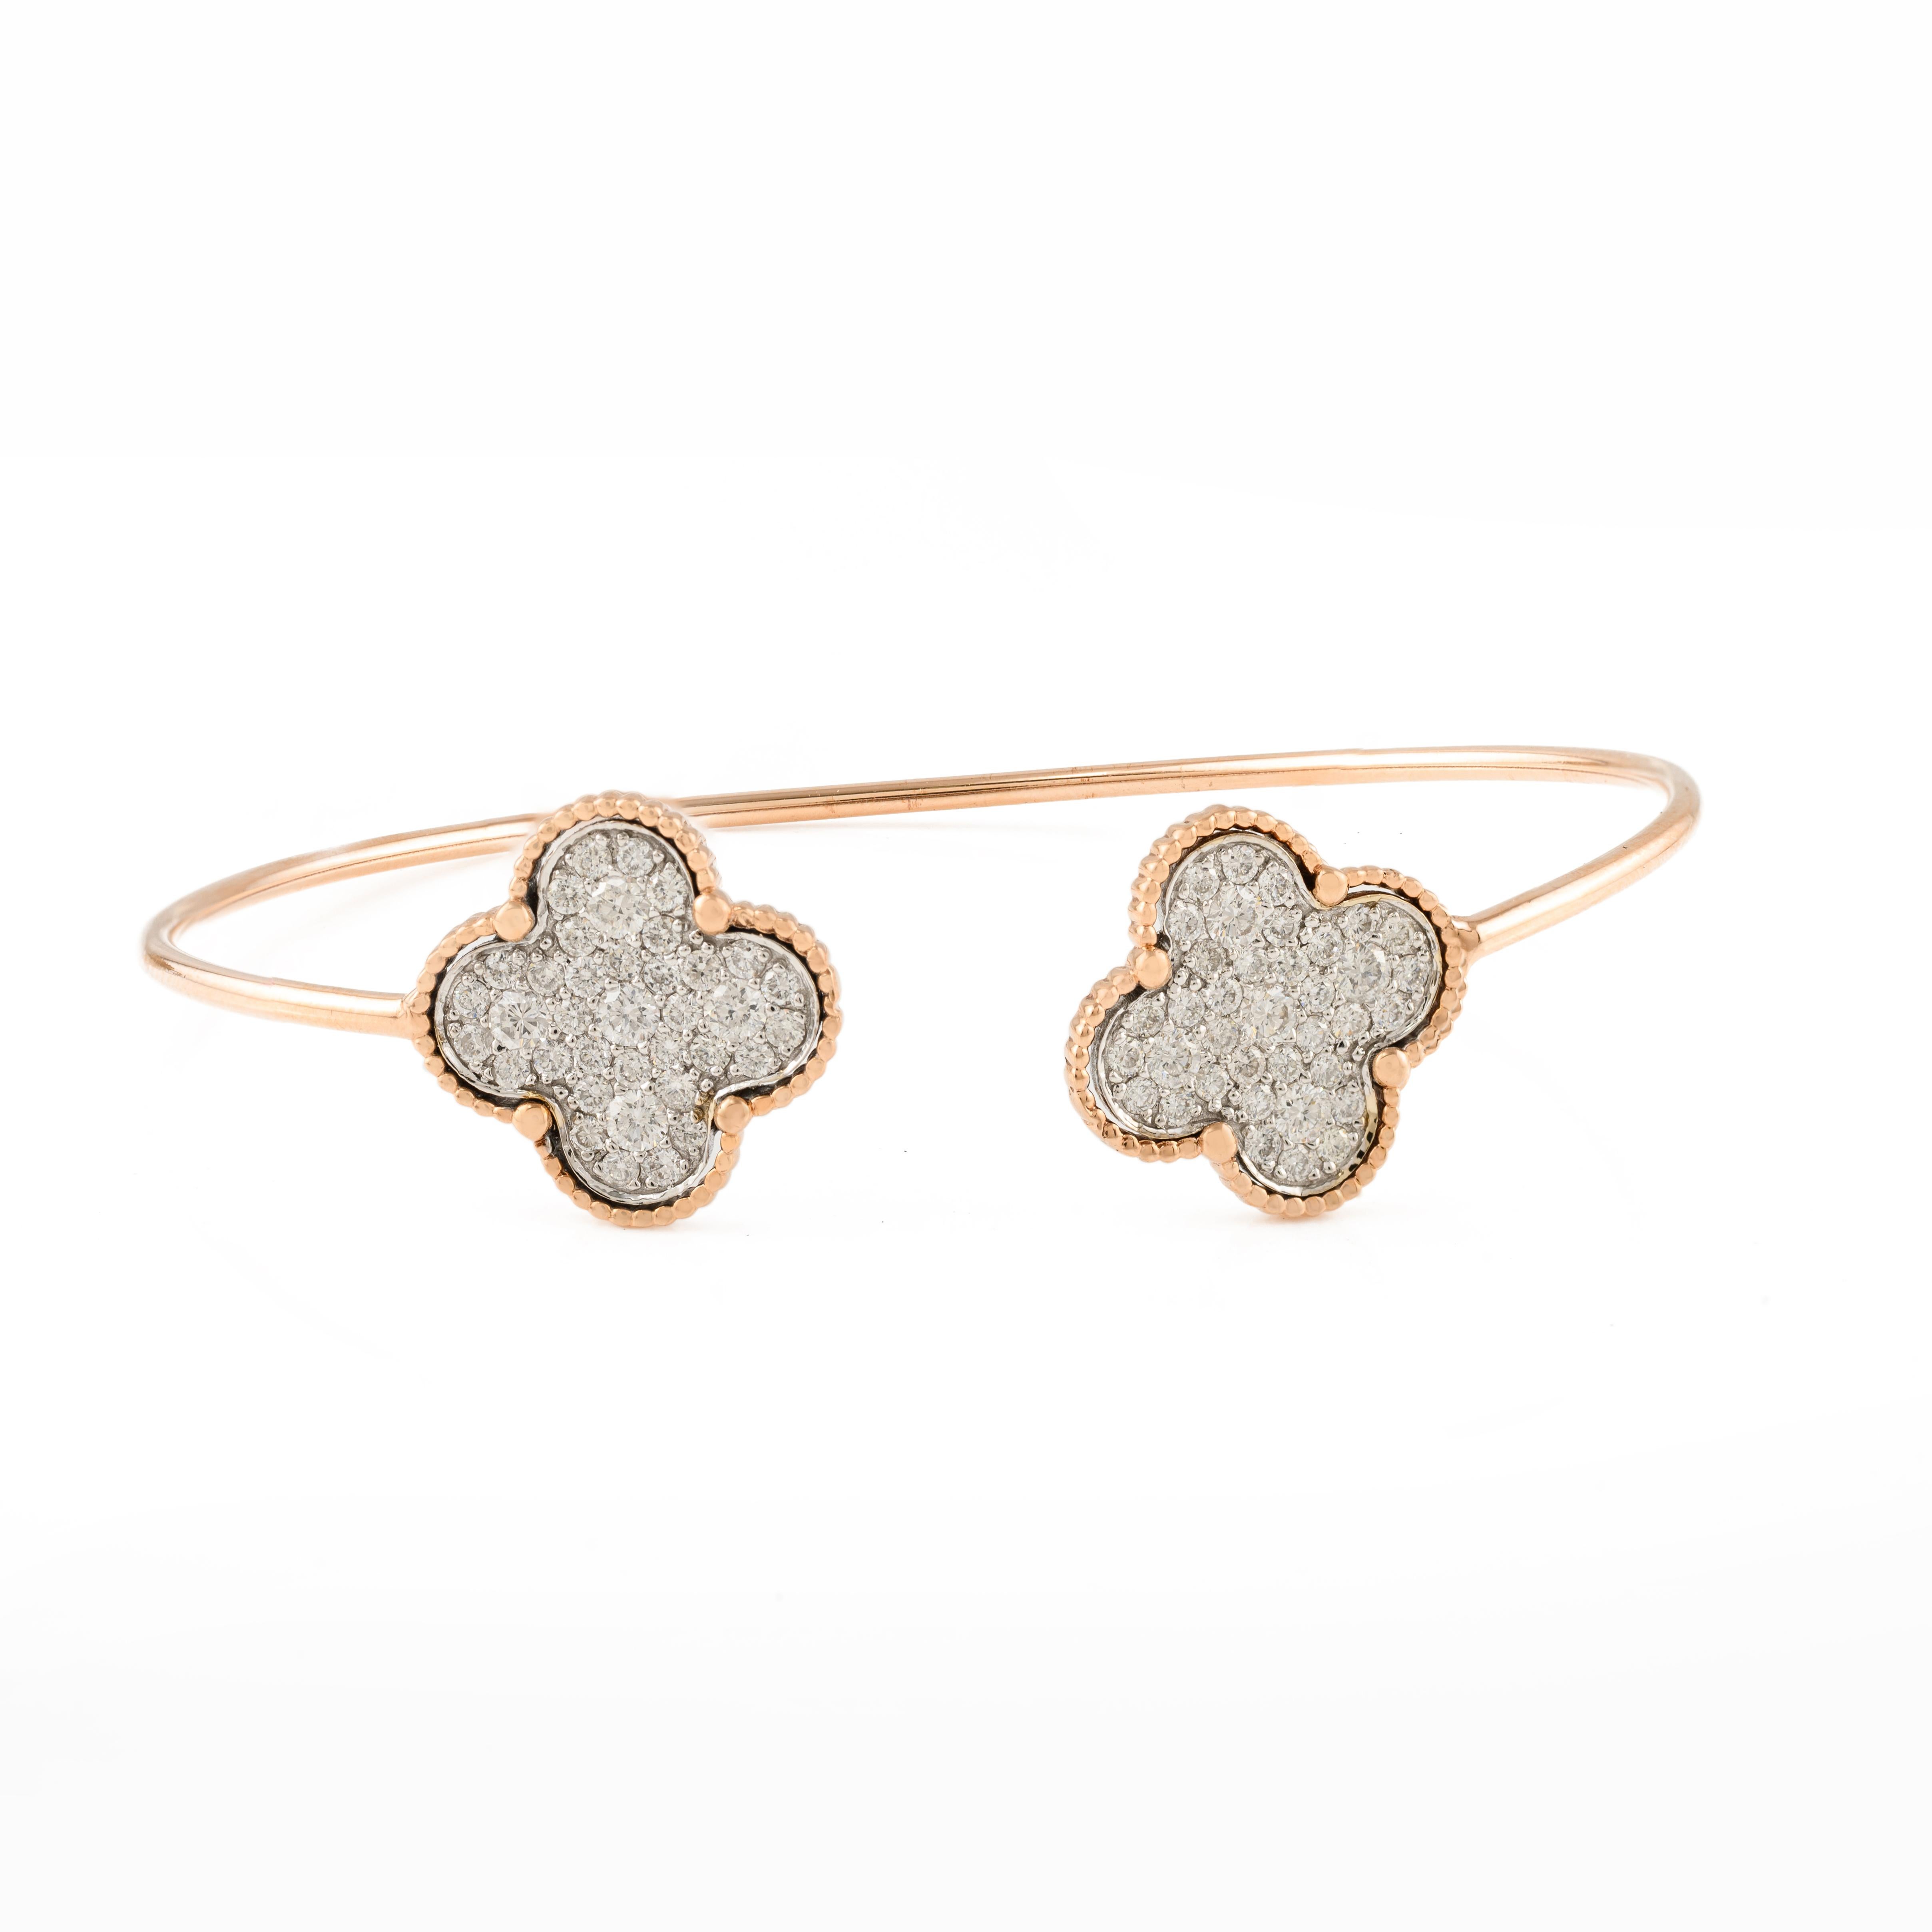 Round Cut Clover Diamond Cuff Bracelet 18k Solid Rose Gold, Christmas Gift For Her For Sale